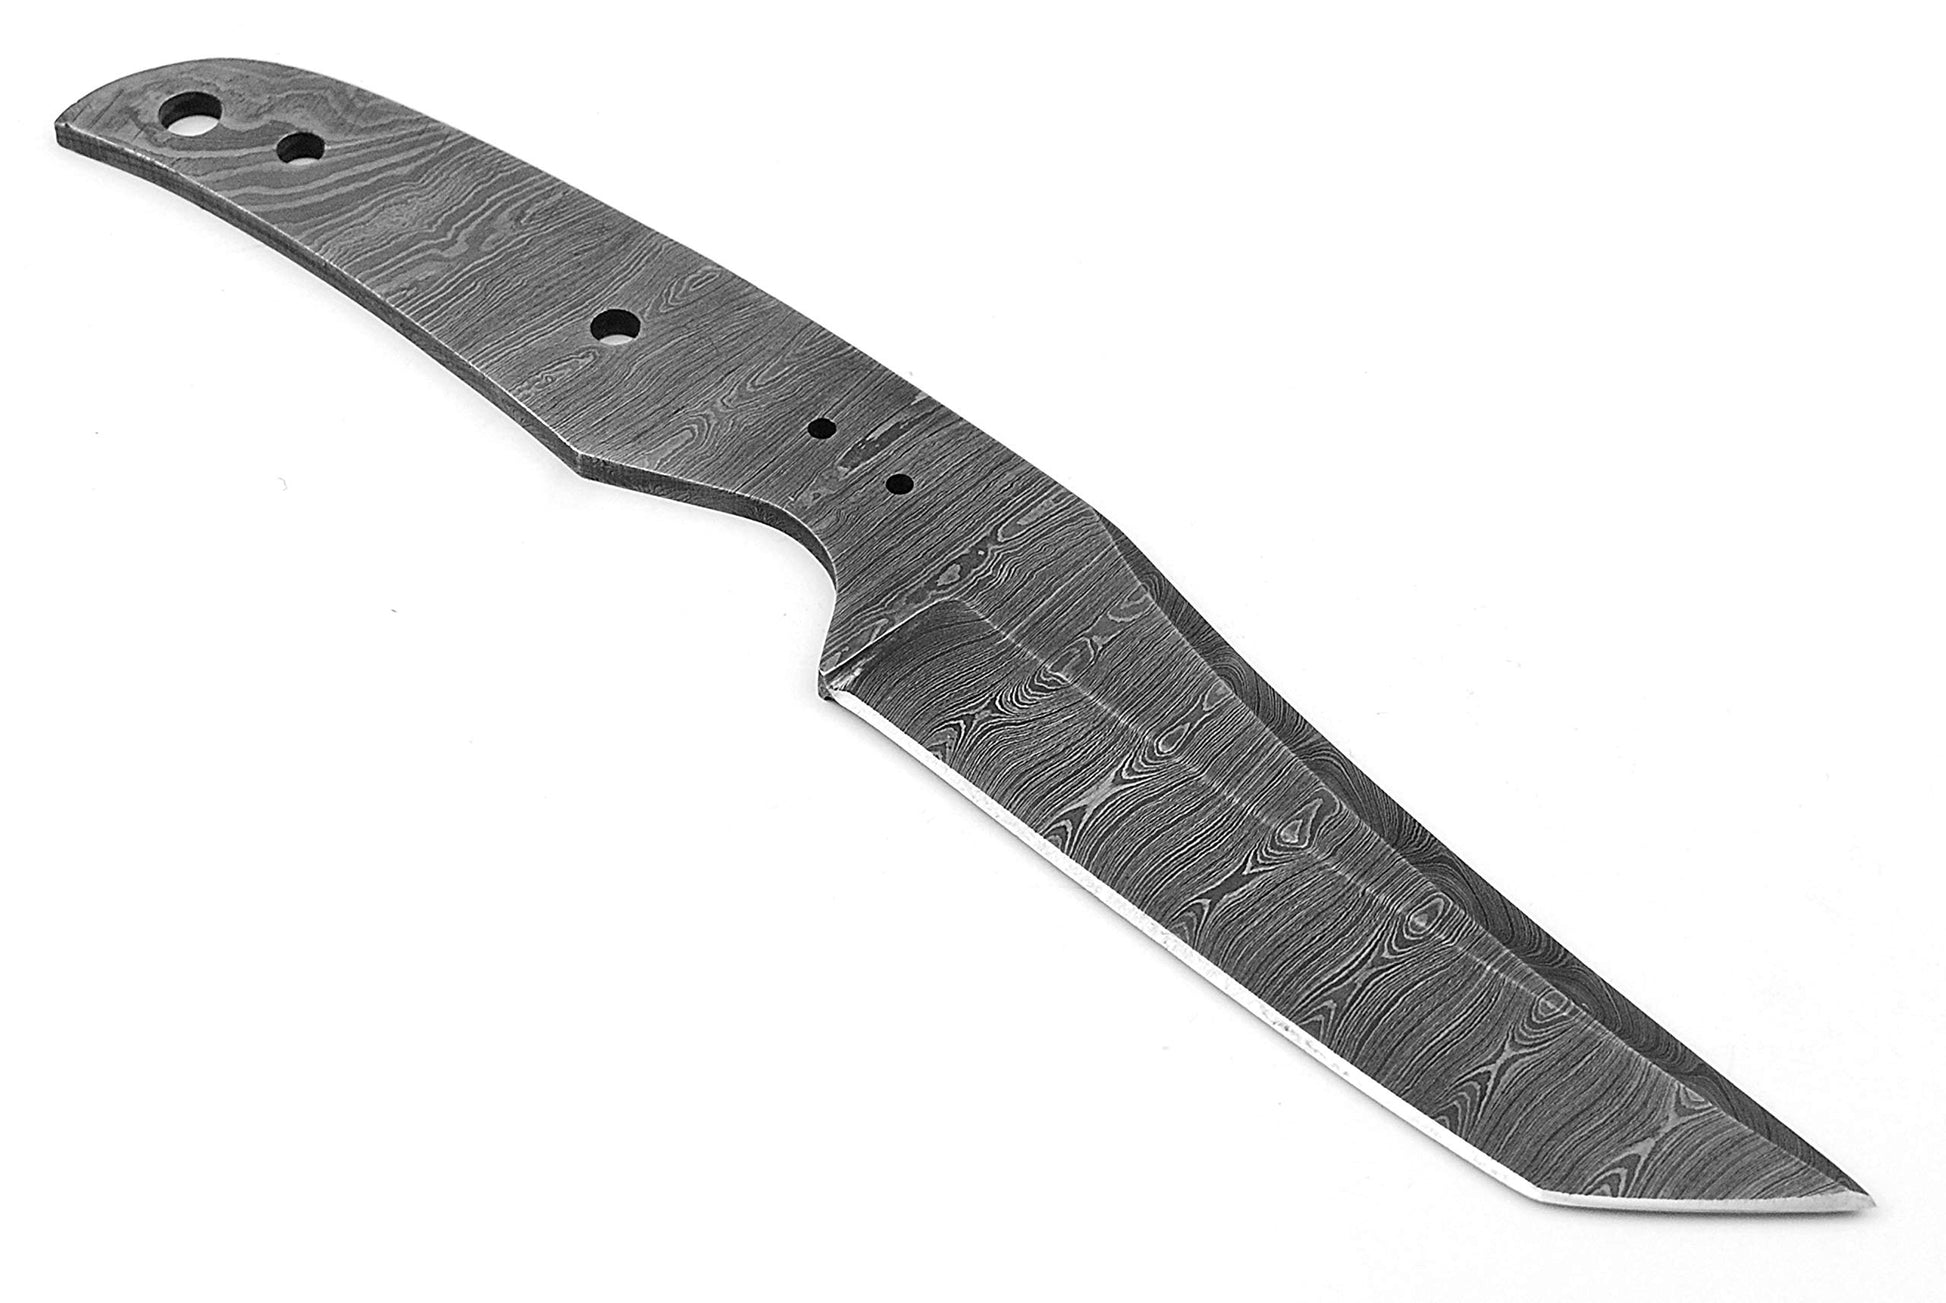 ColdLand Damascus Knife Making Kit DIY Handmade Knife Kit Includes Knife Blank Knife Steel Blade, Pins, Knife with Sheath, Handle Scales for Knife Making Supplies, Knife Steel NB117 - Opticdeals